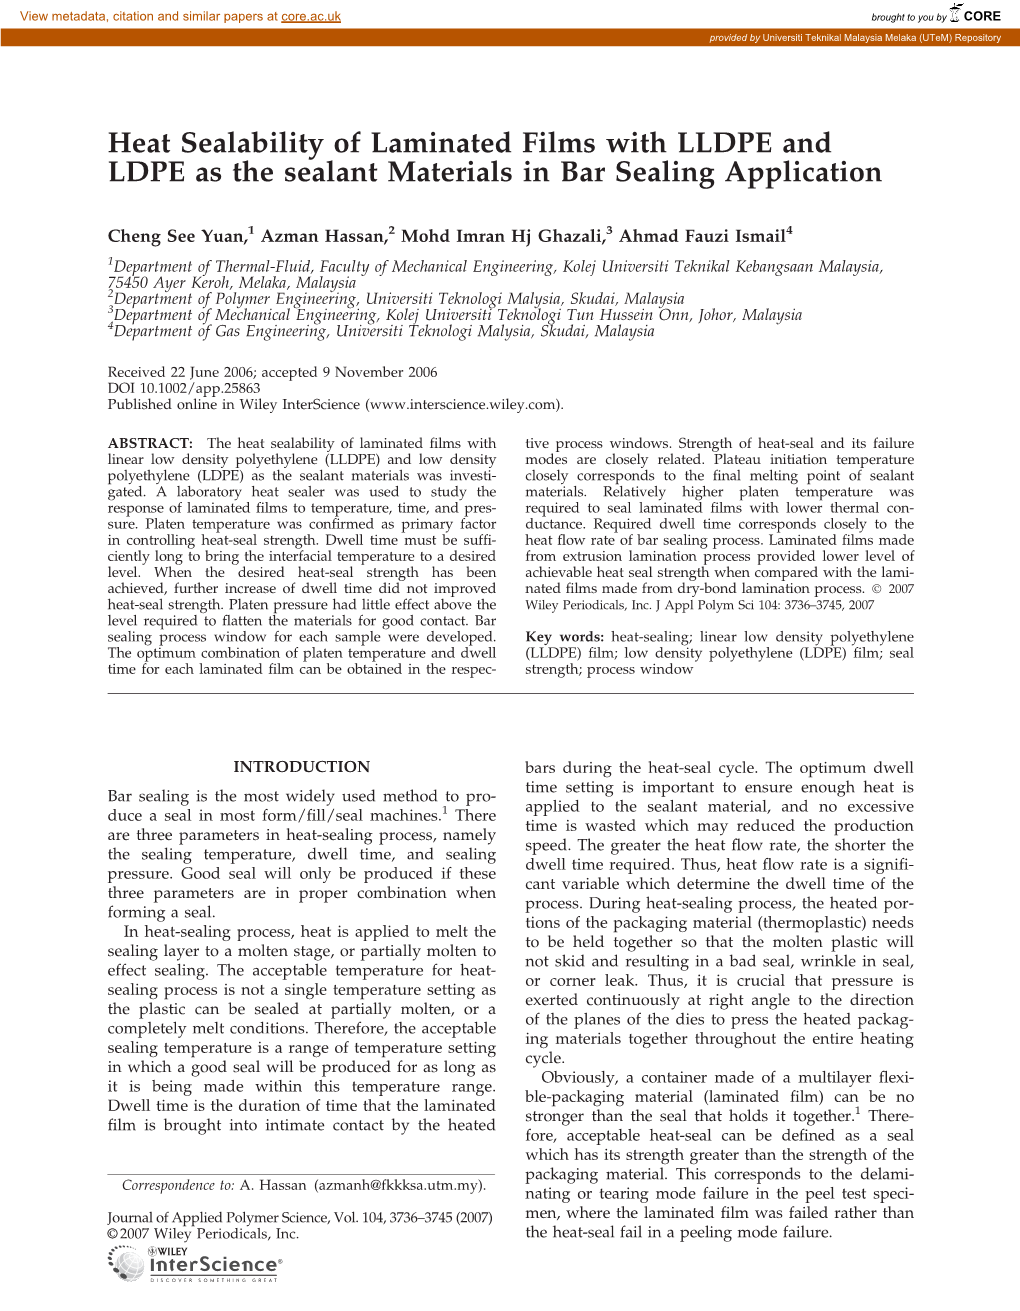 Heat Sealability of Laminated Films with LLDPE and LDPE As the Sealant Materials in Bar Sealing Application